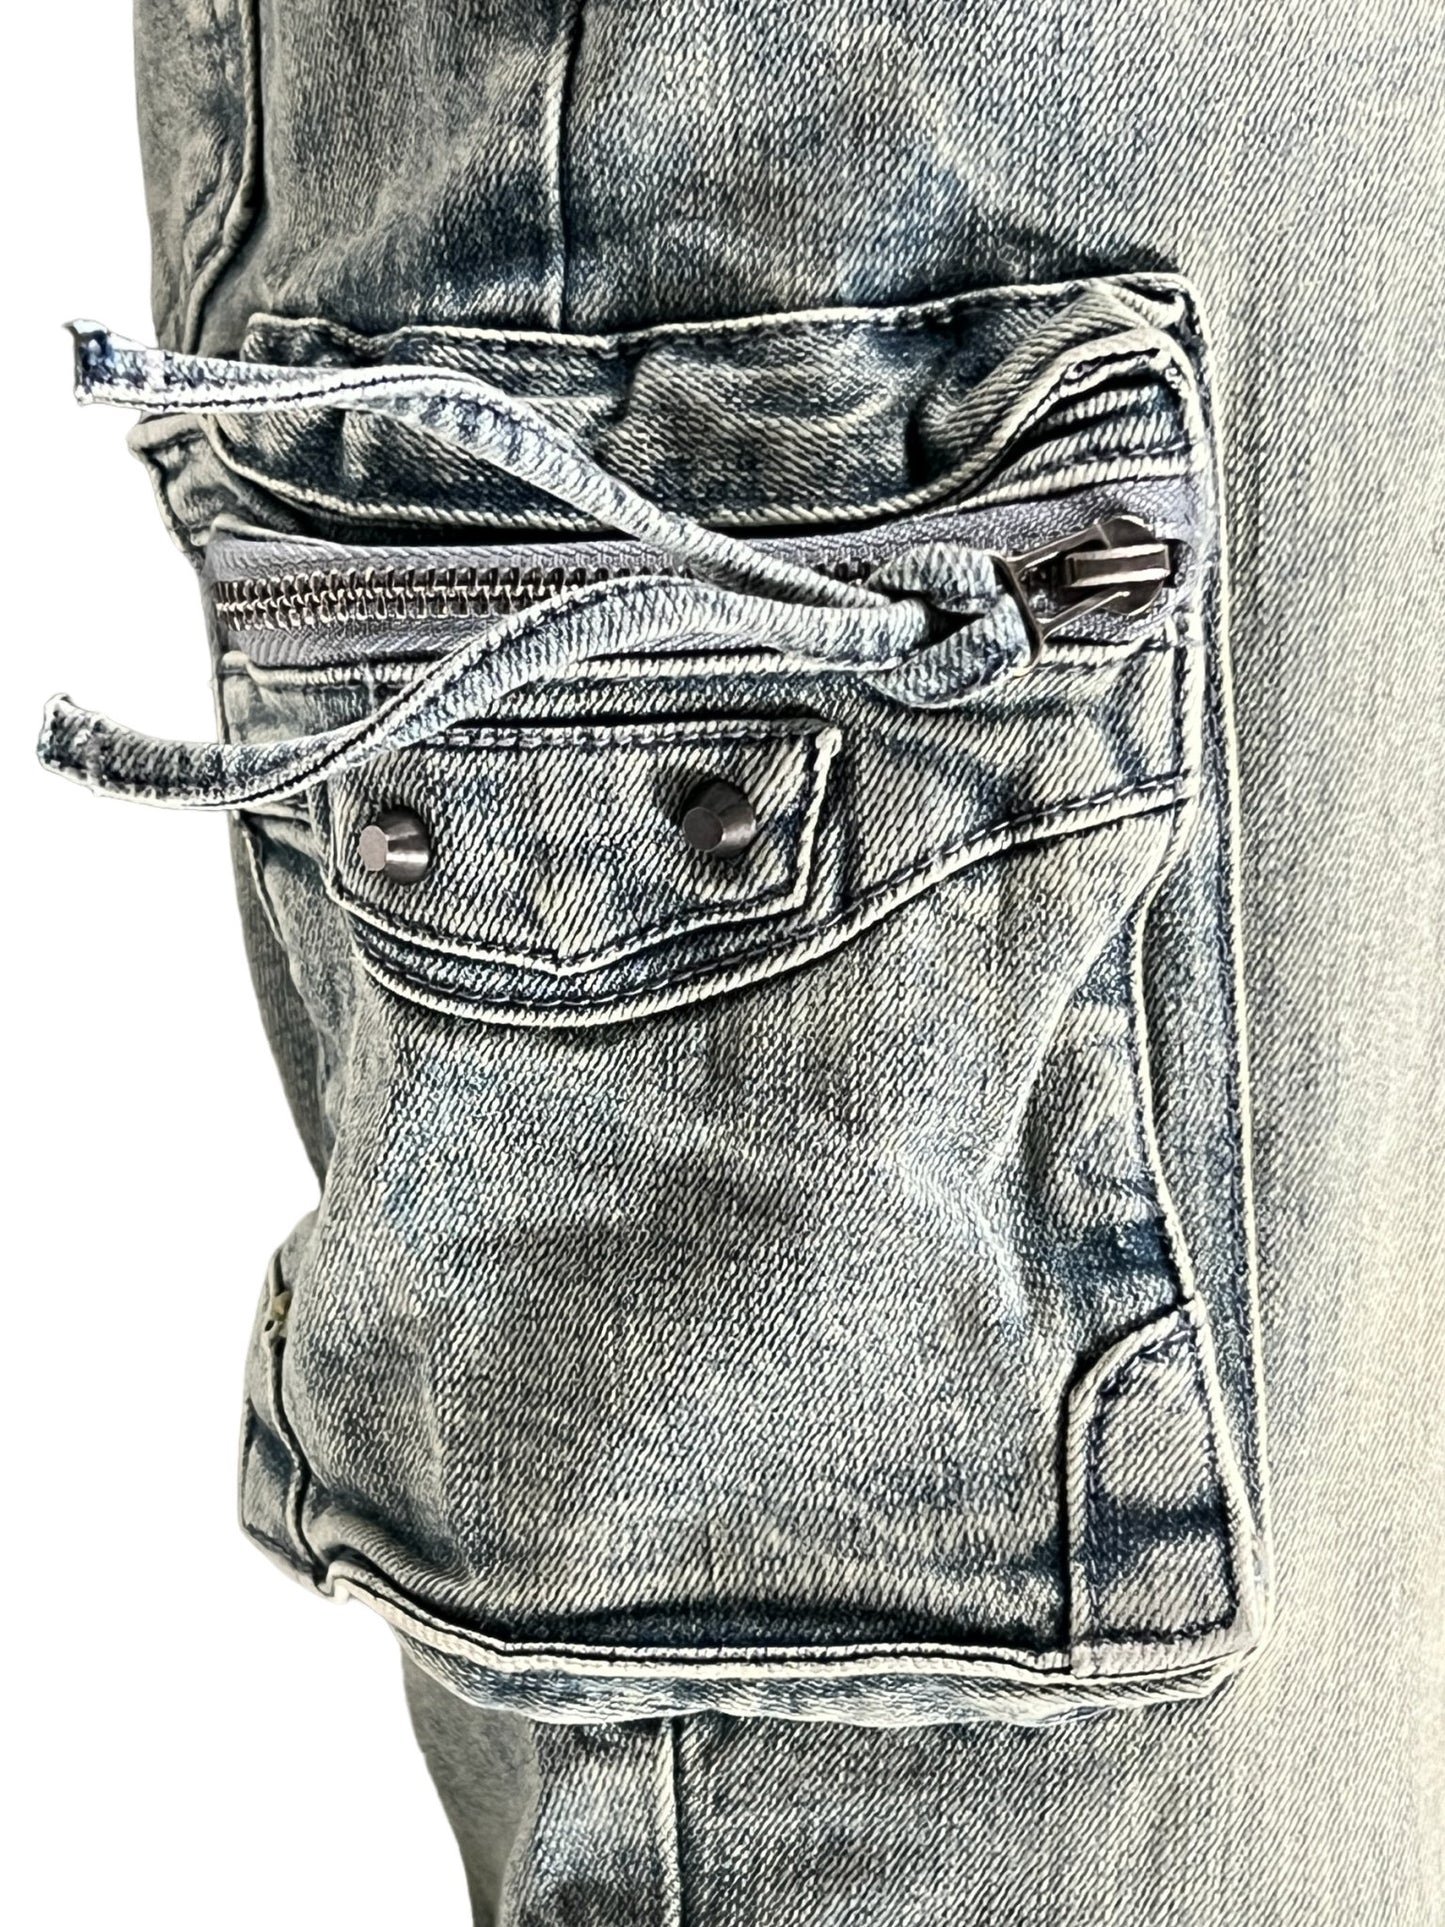 Close-up of a SERENEDE GENESYS cargo jeans pant pocket with zipper detail.